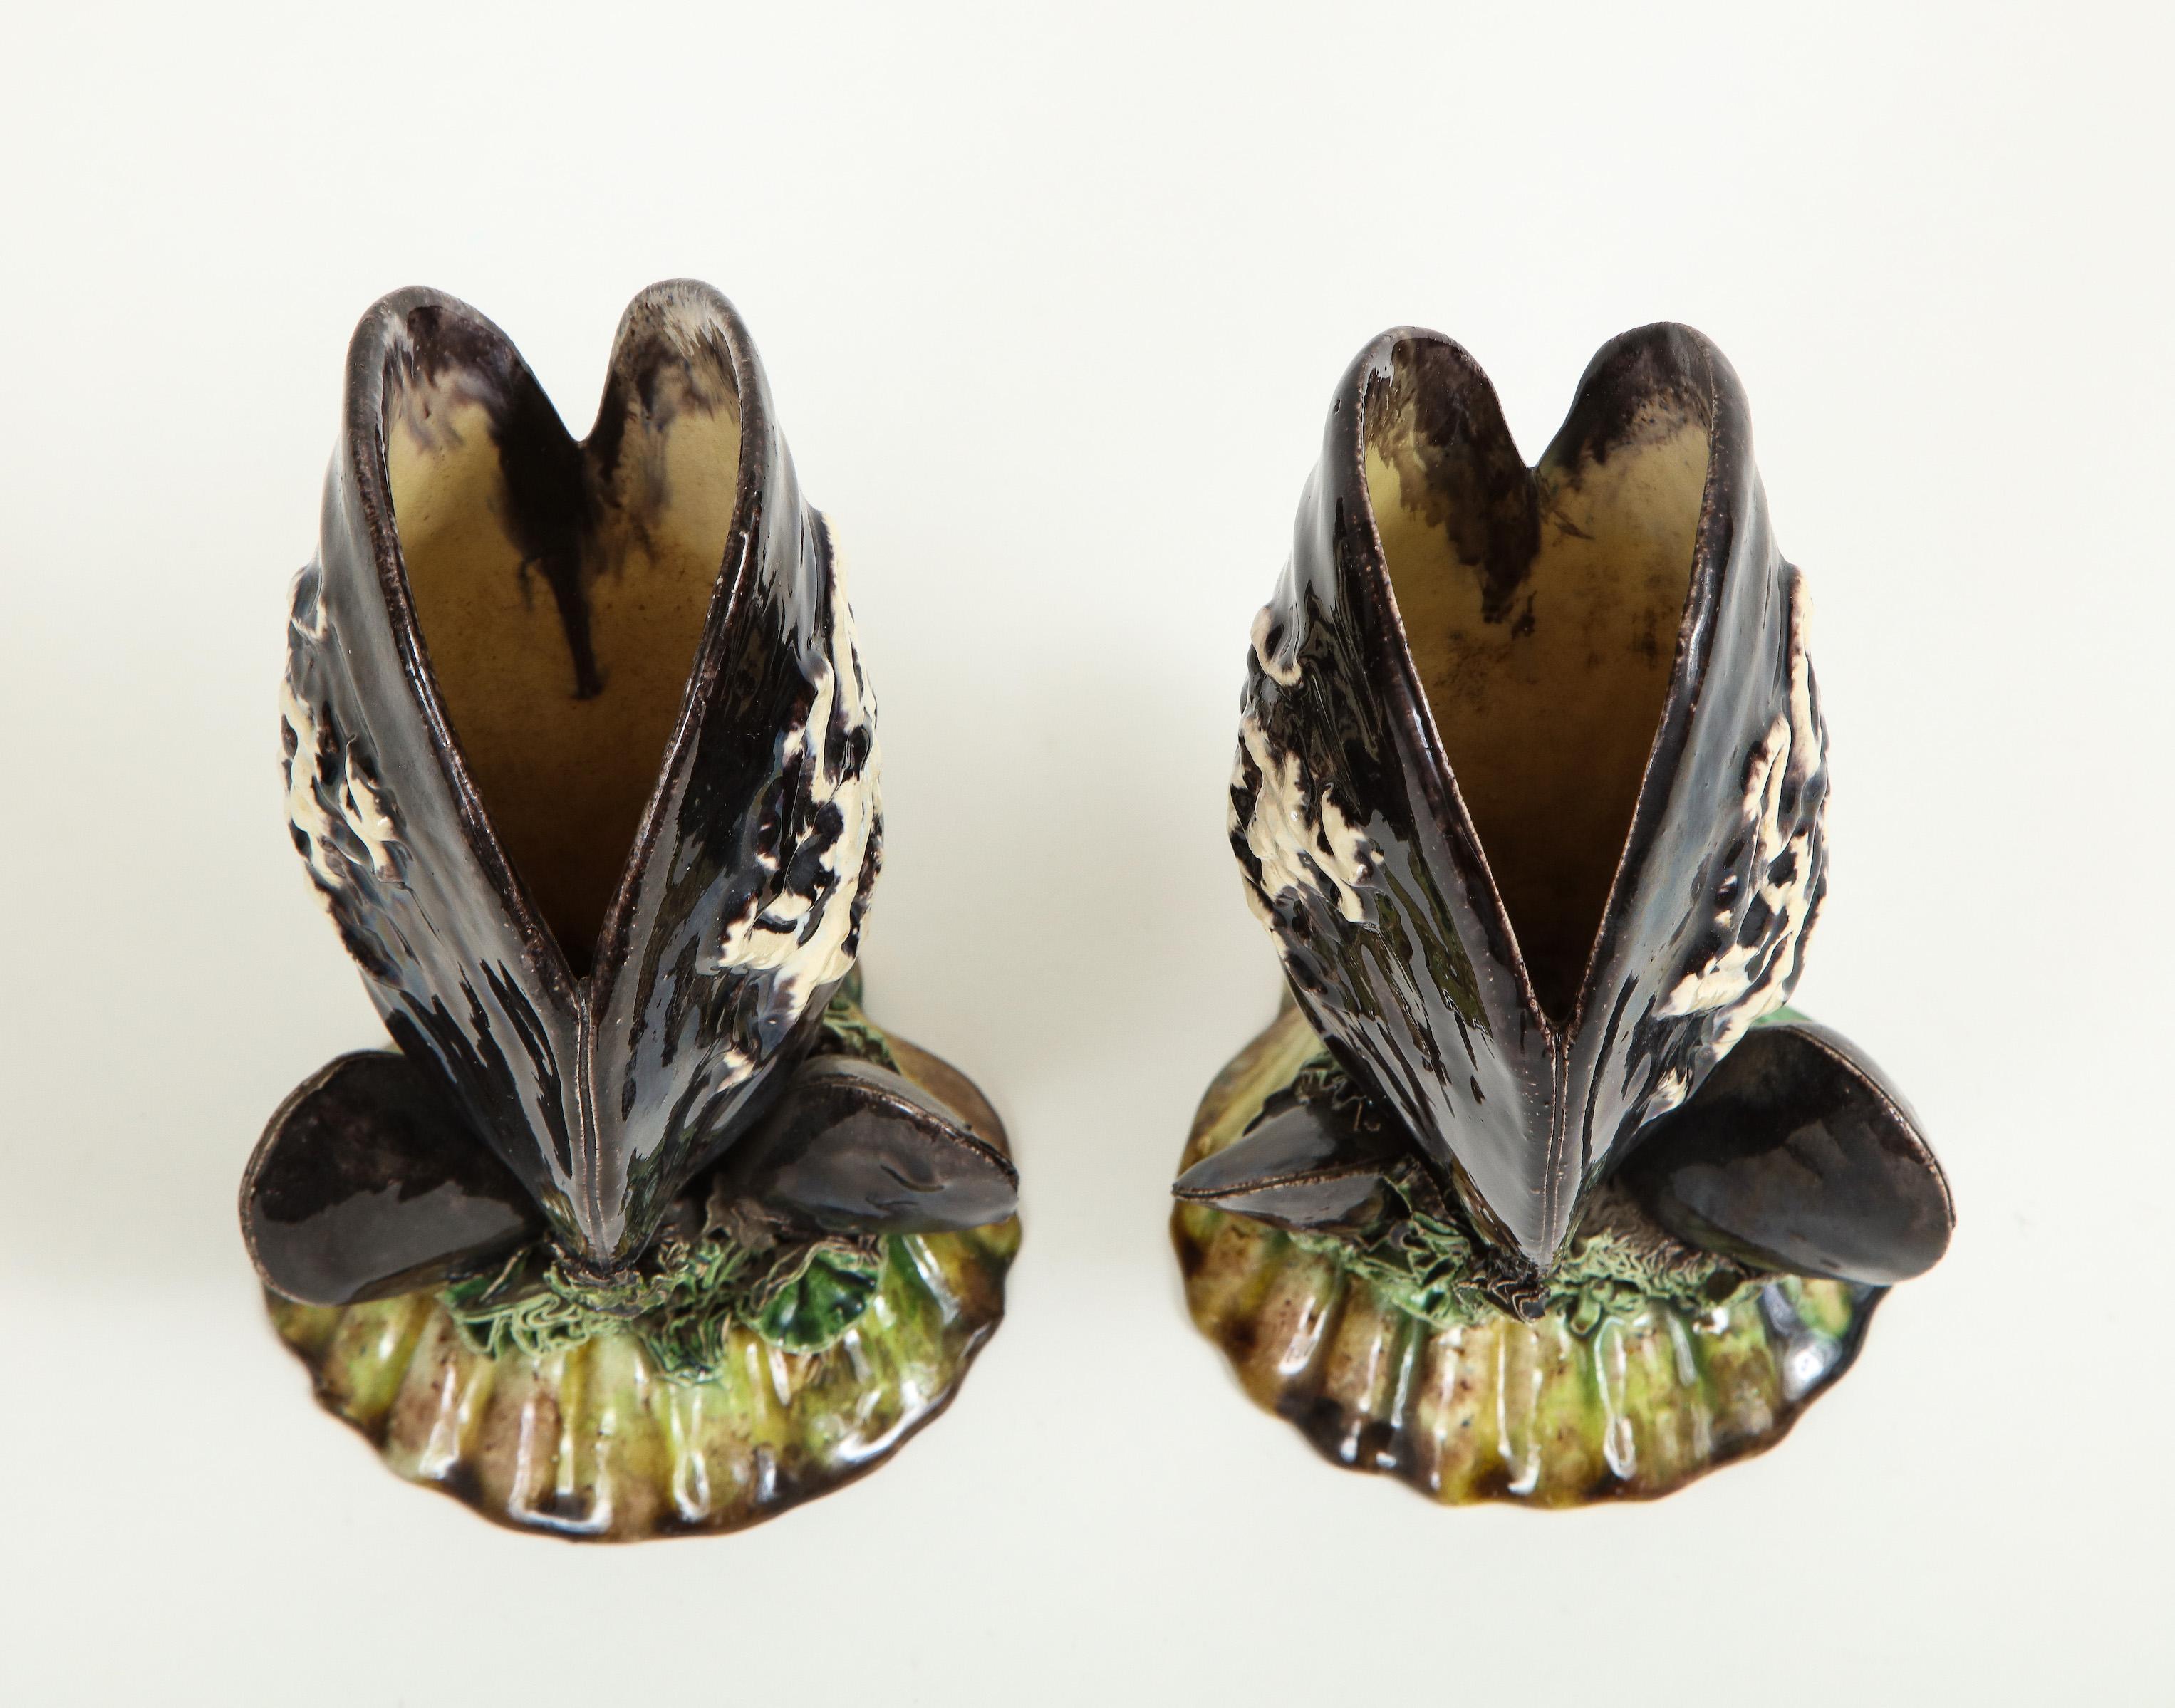 Pair of Portuguese Majolica Mussels Spill Vases For Sale 5